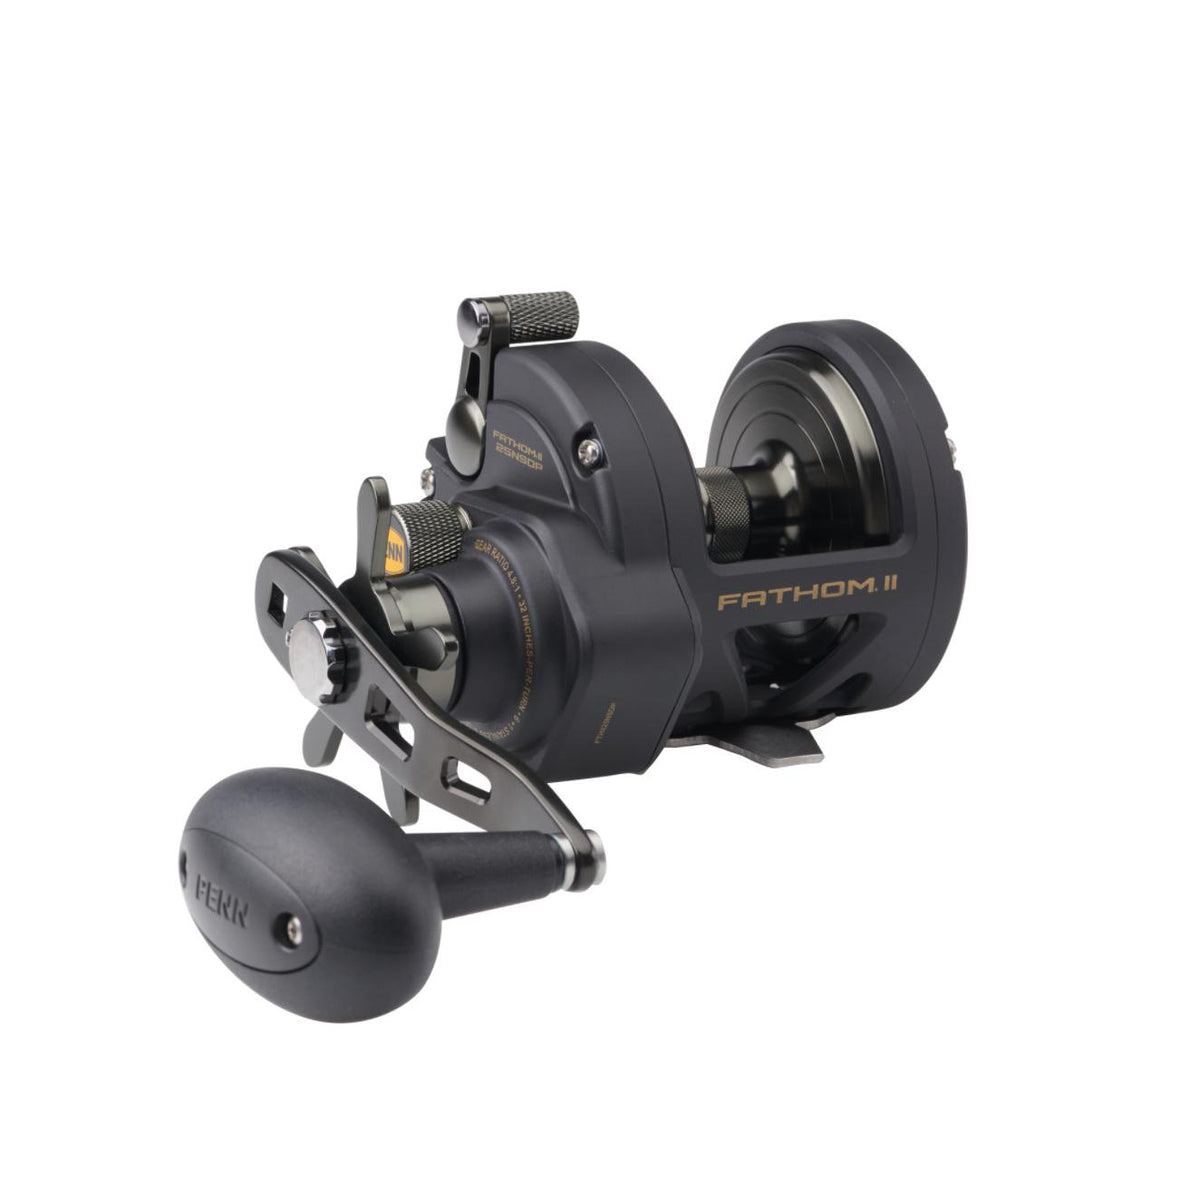 Accurate Tern 2 Conventional Star Drag Reels